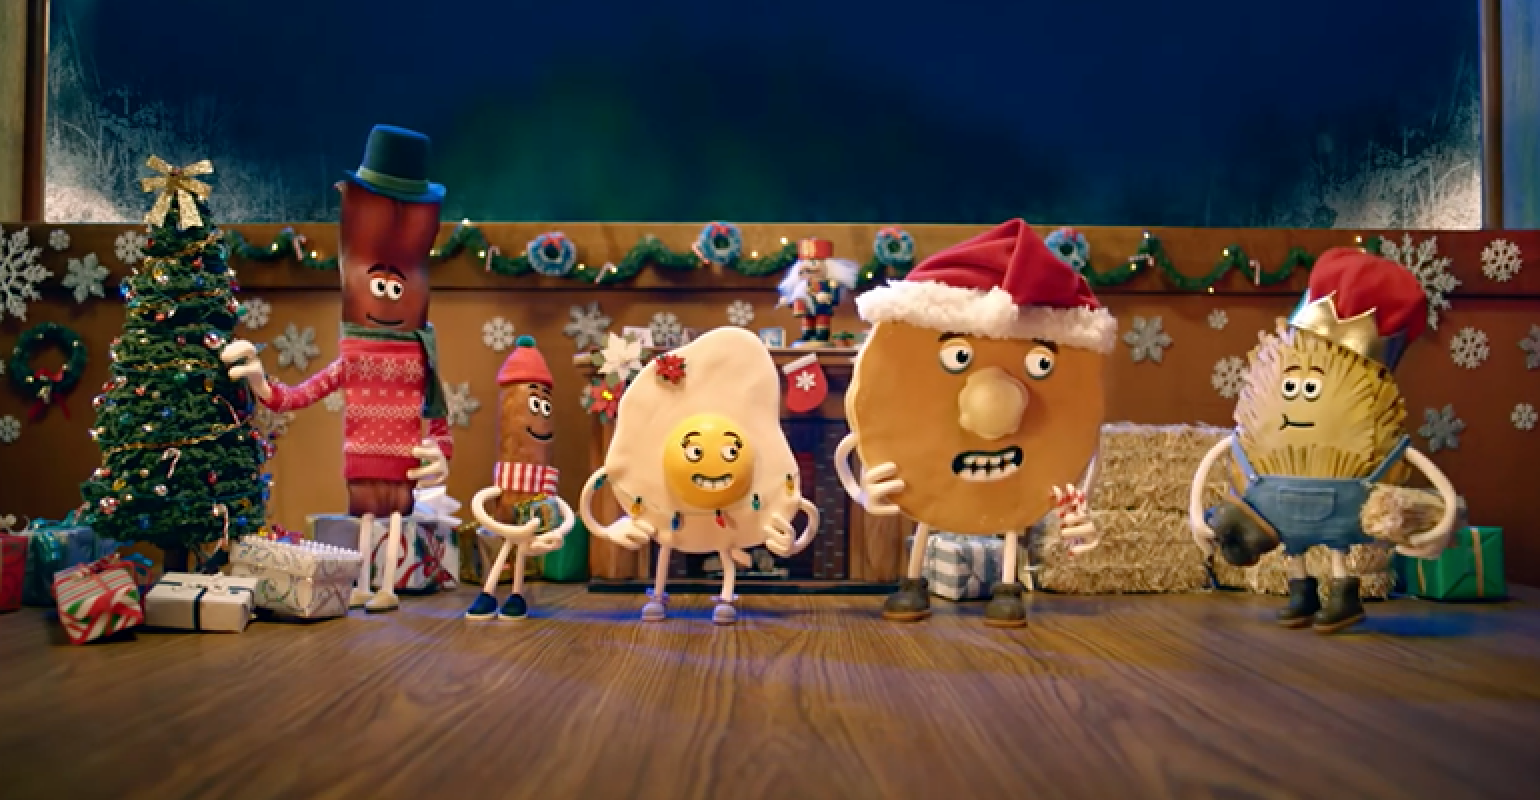 Mustsee videos Denny's mascots celebrate the holidays Nation's